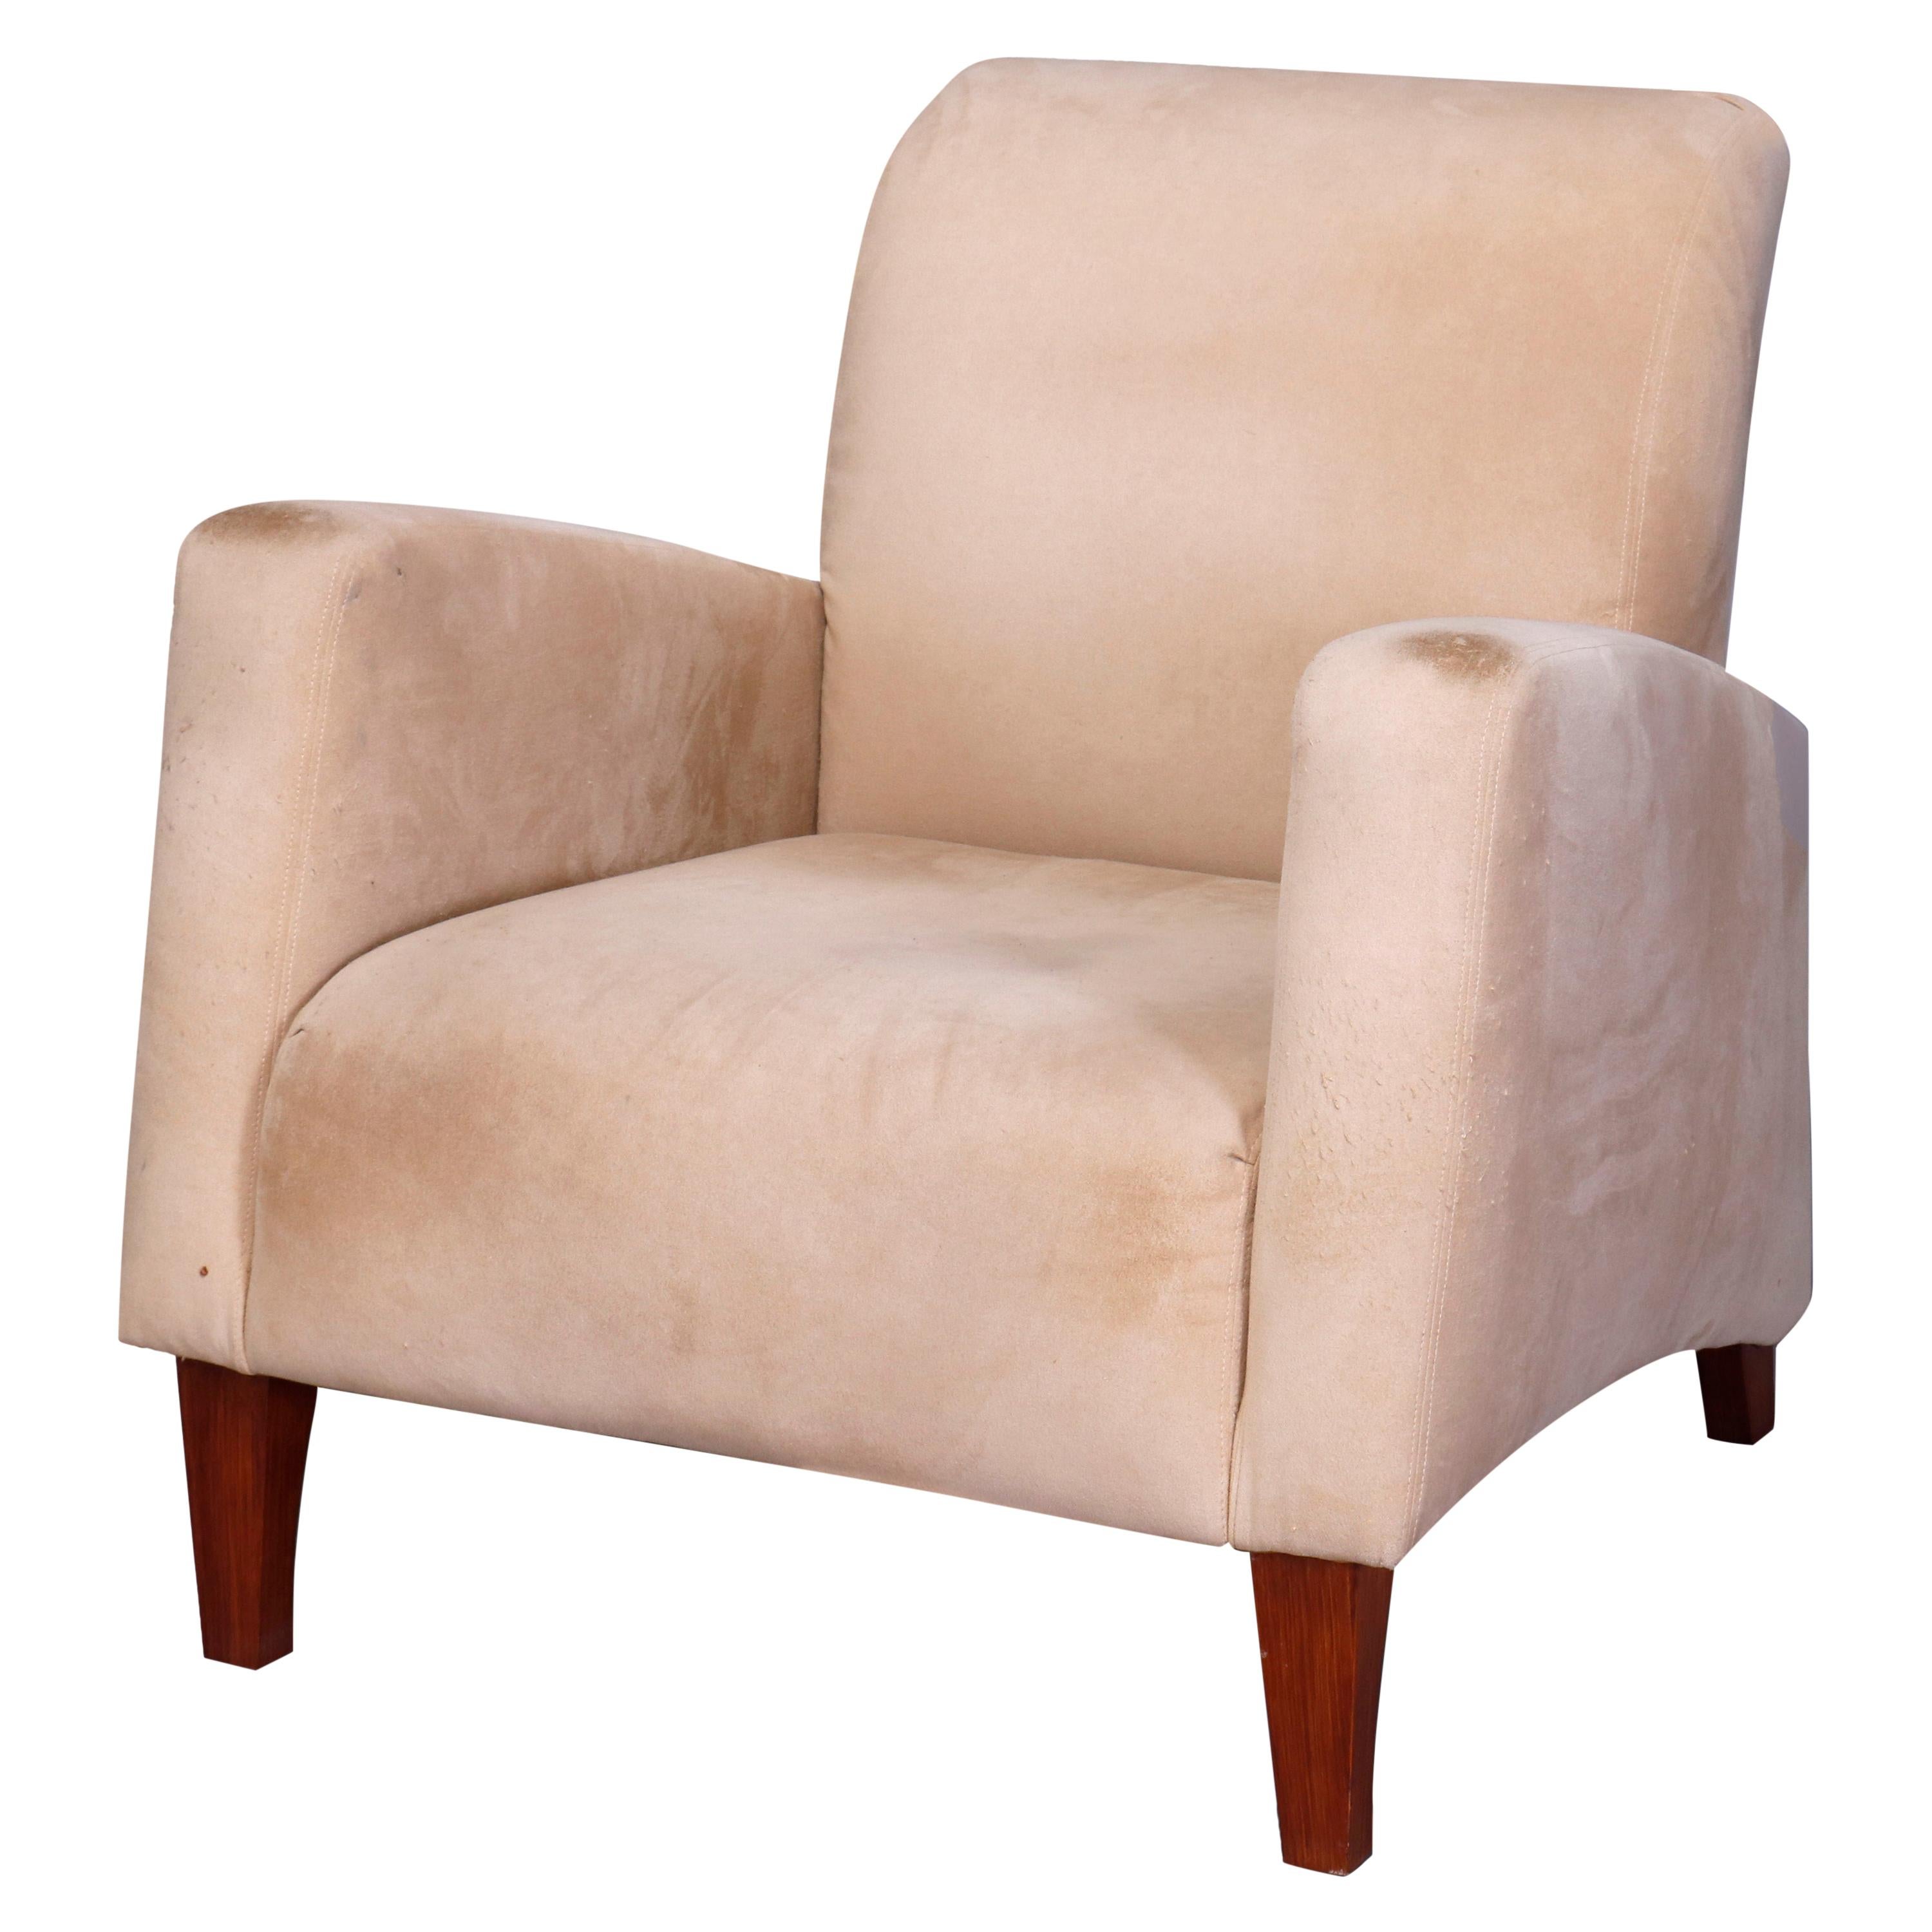 Mid-Century Modern Upholstered Armchair, Manner of Paolo Buffa, Italy